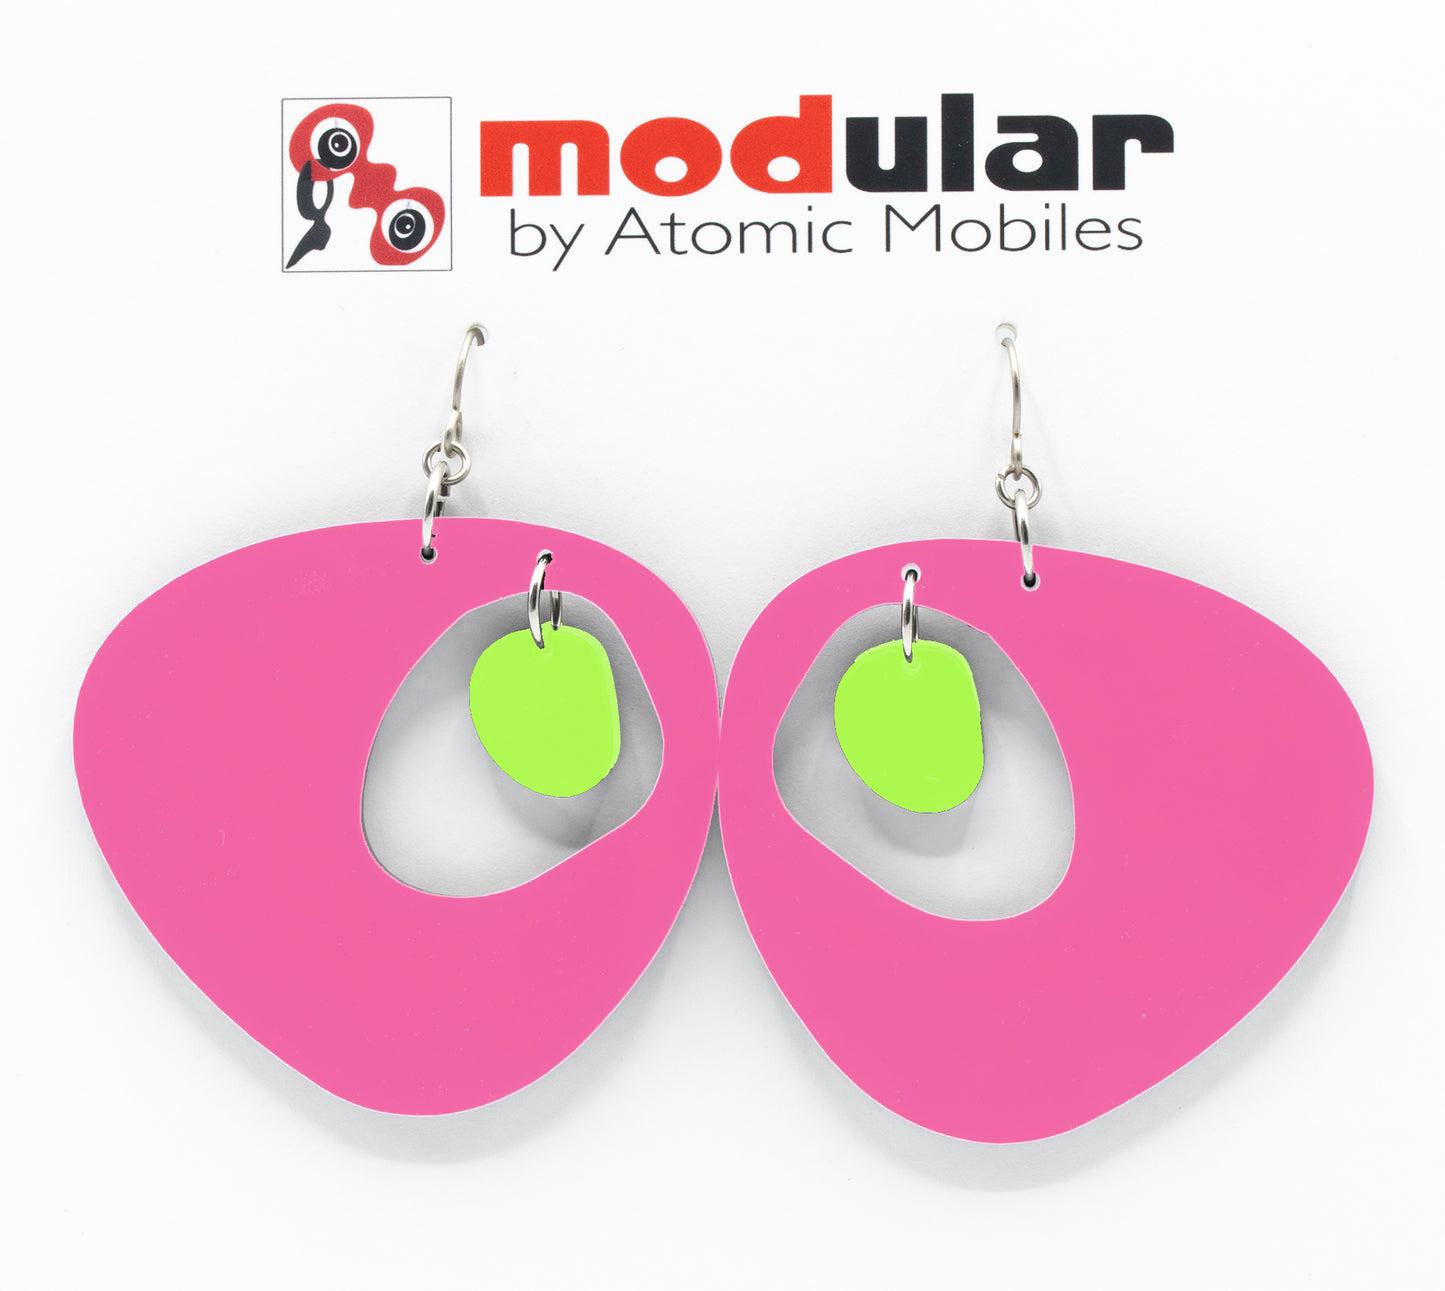 MODular Earrings - Boomerang Statement Earrings in Hot Pink and Lime by AtomicMobiles.com - retro era inspired mod handmade jewelry